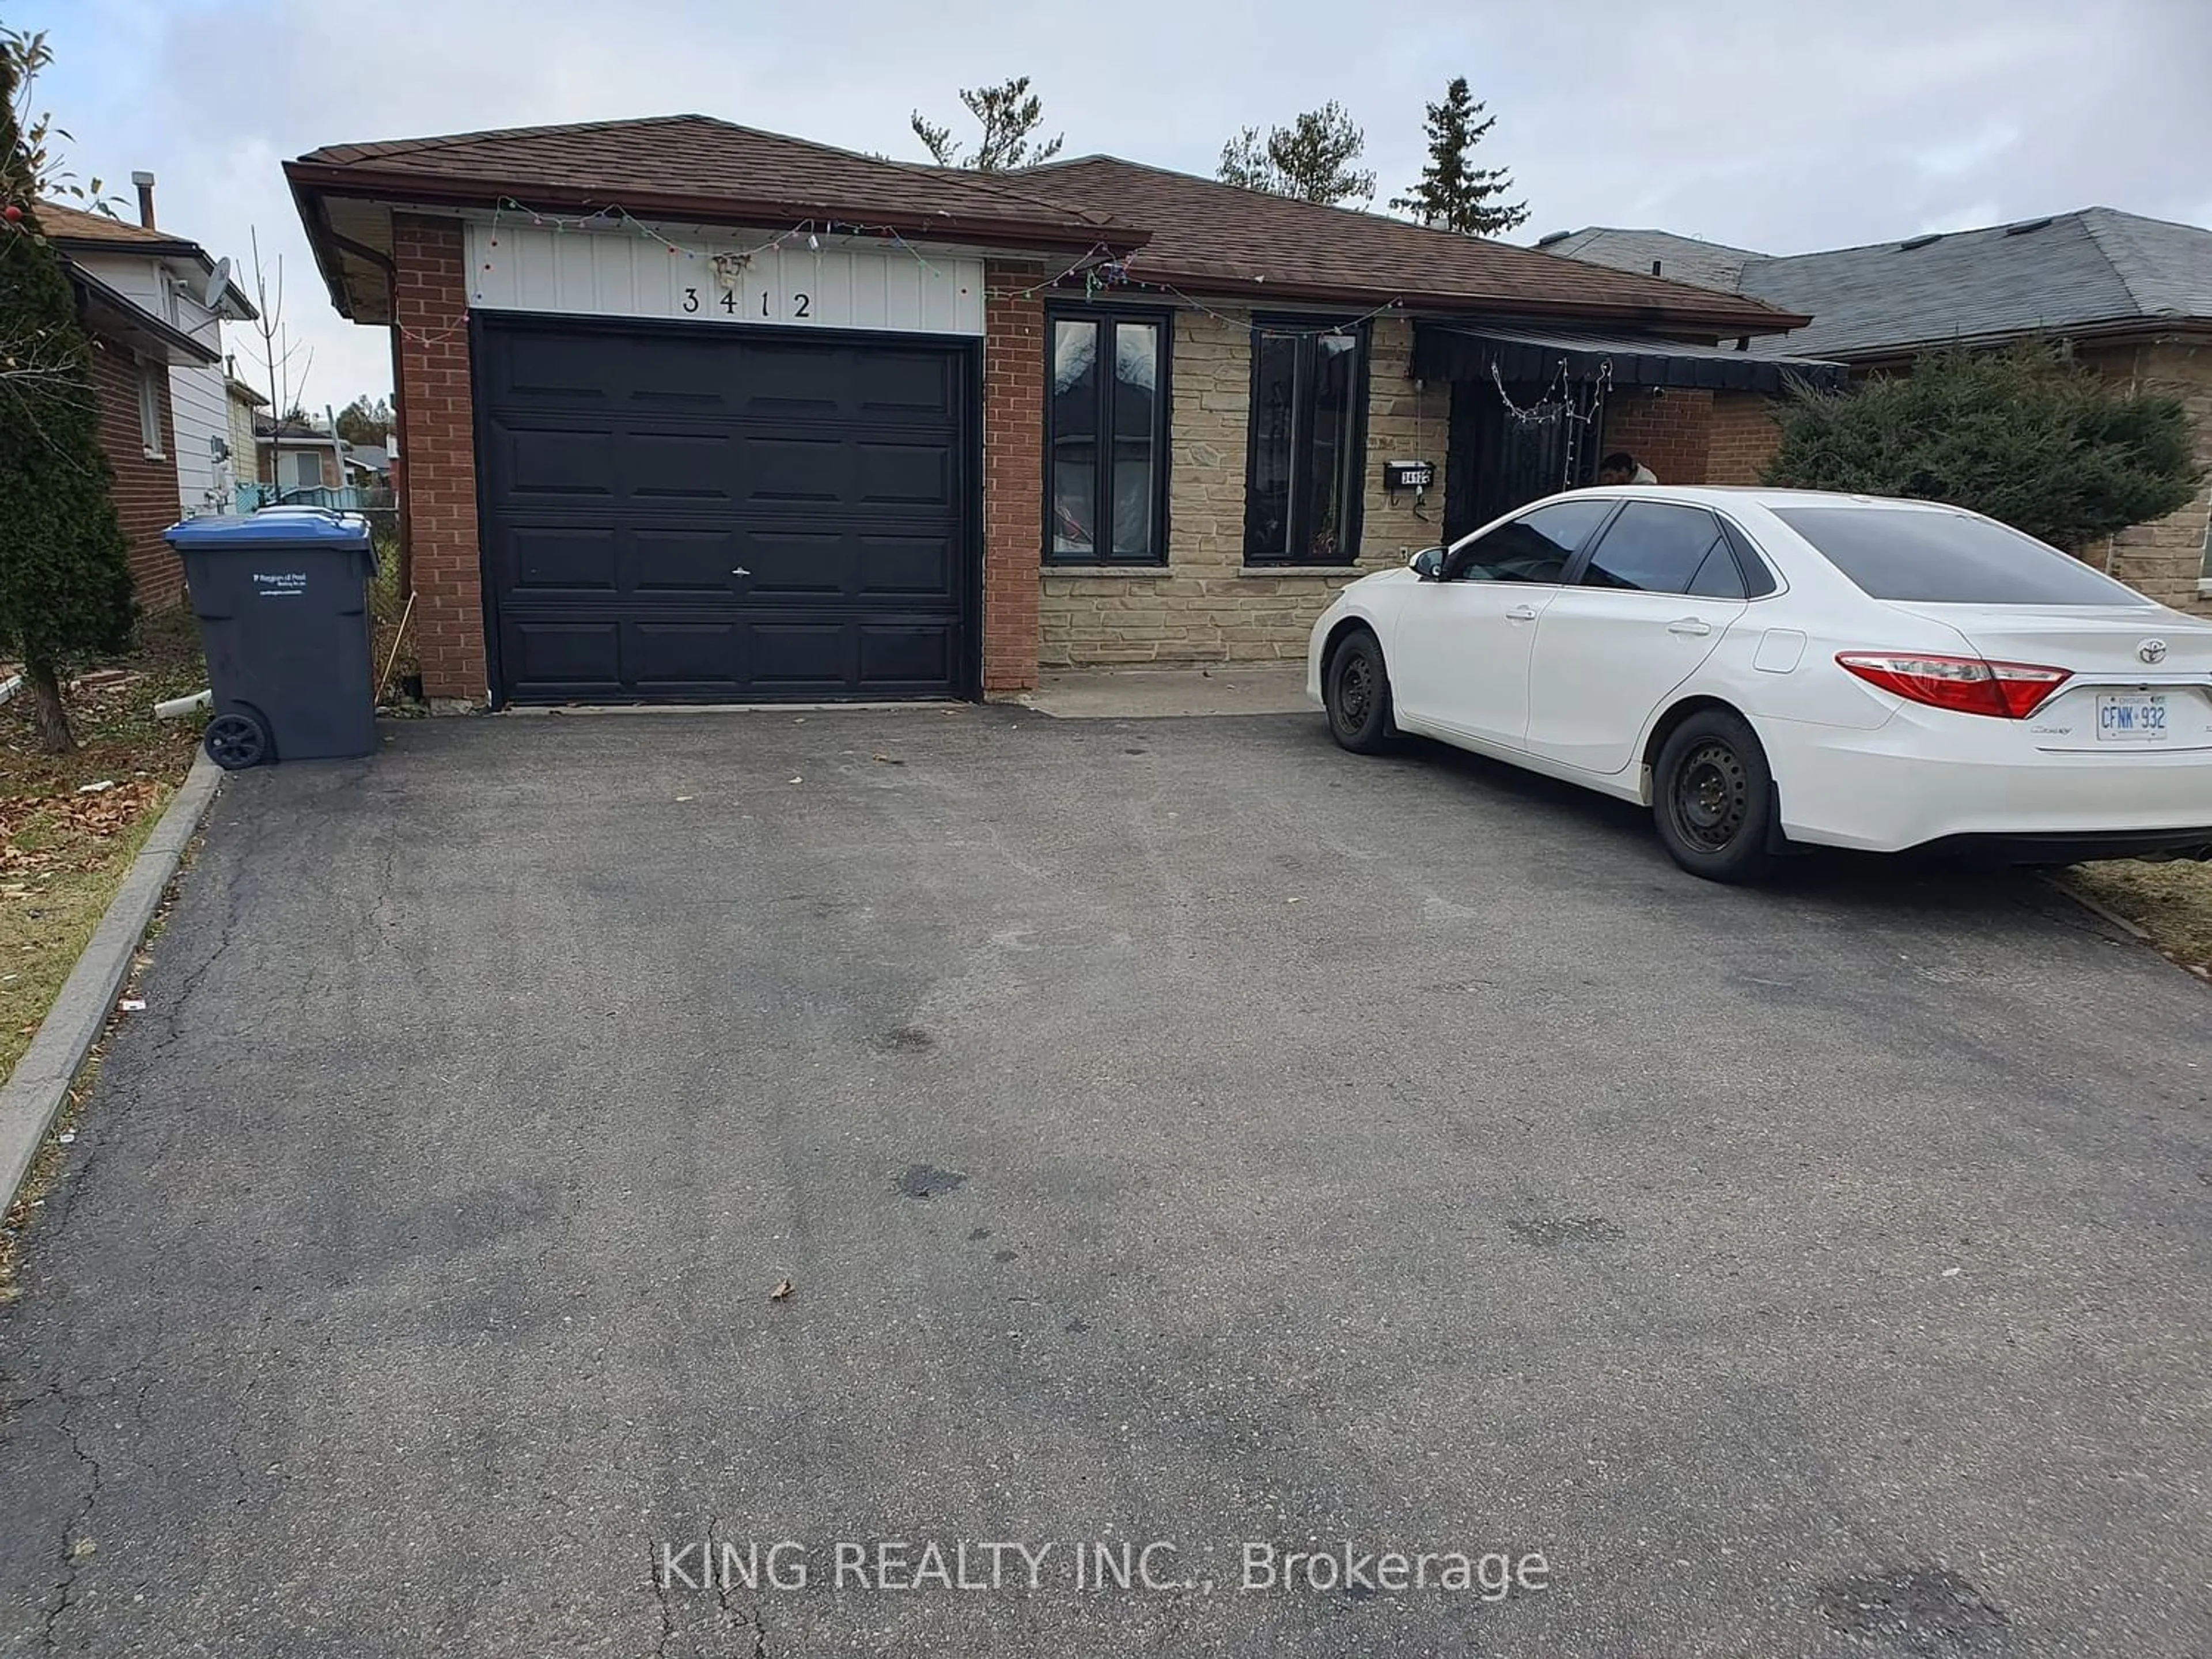 Frontside or backside of a home for 3412 Monica Dr, Mississauga Ontario L4T 3E7